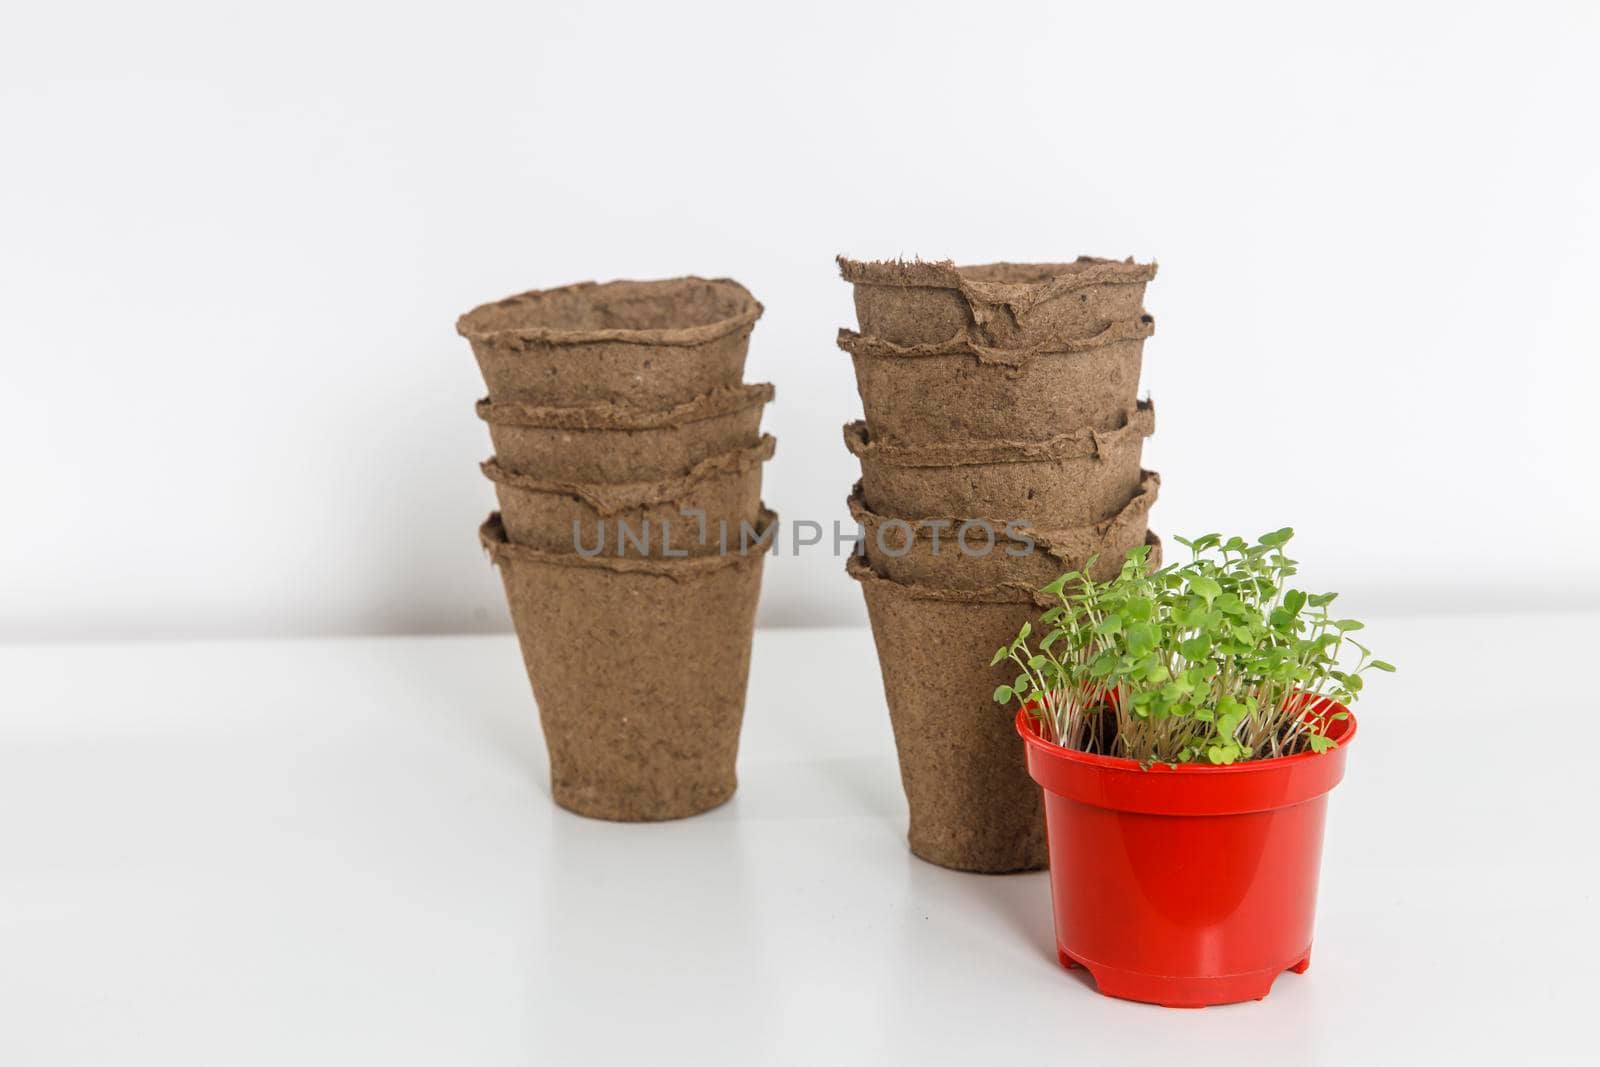 Growing flower seedlings in peat tablets and plastic containers, on a white wooden background. Sprouted arugula in a plastic pot for salad in the kitchen. Winter's end